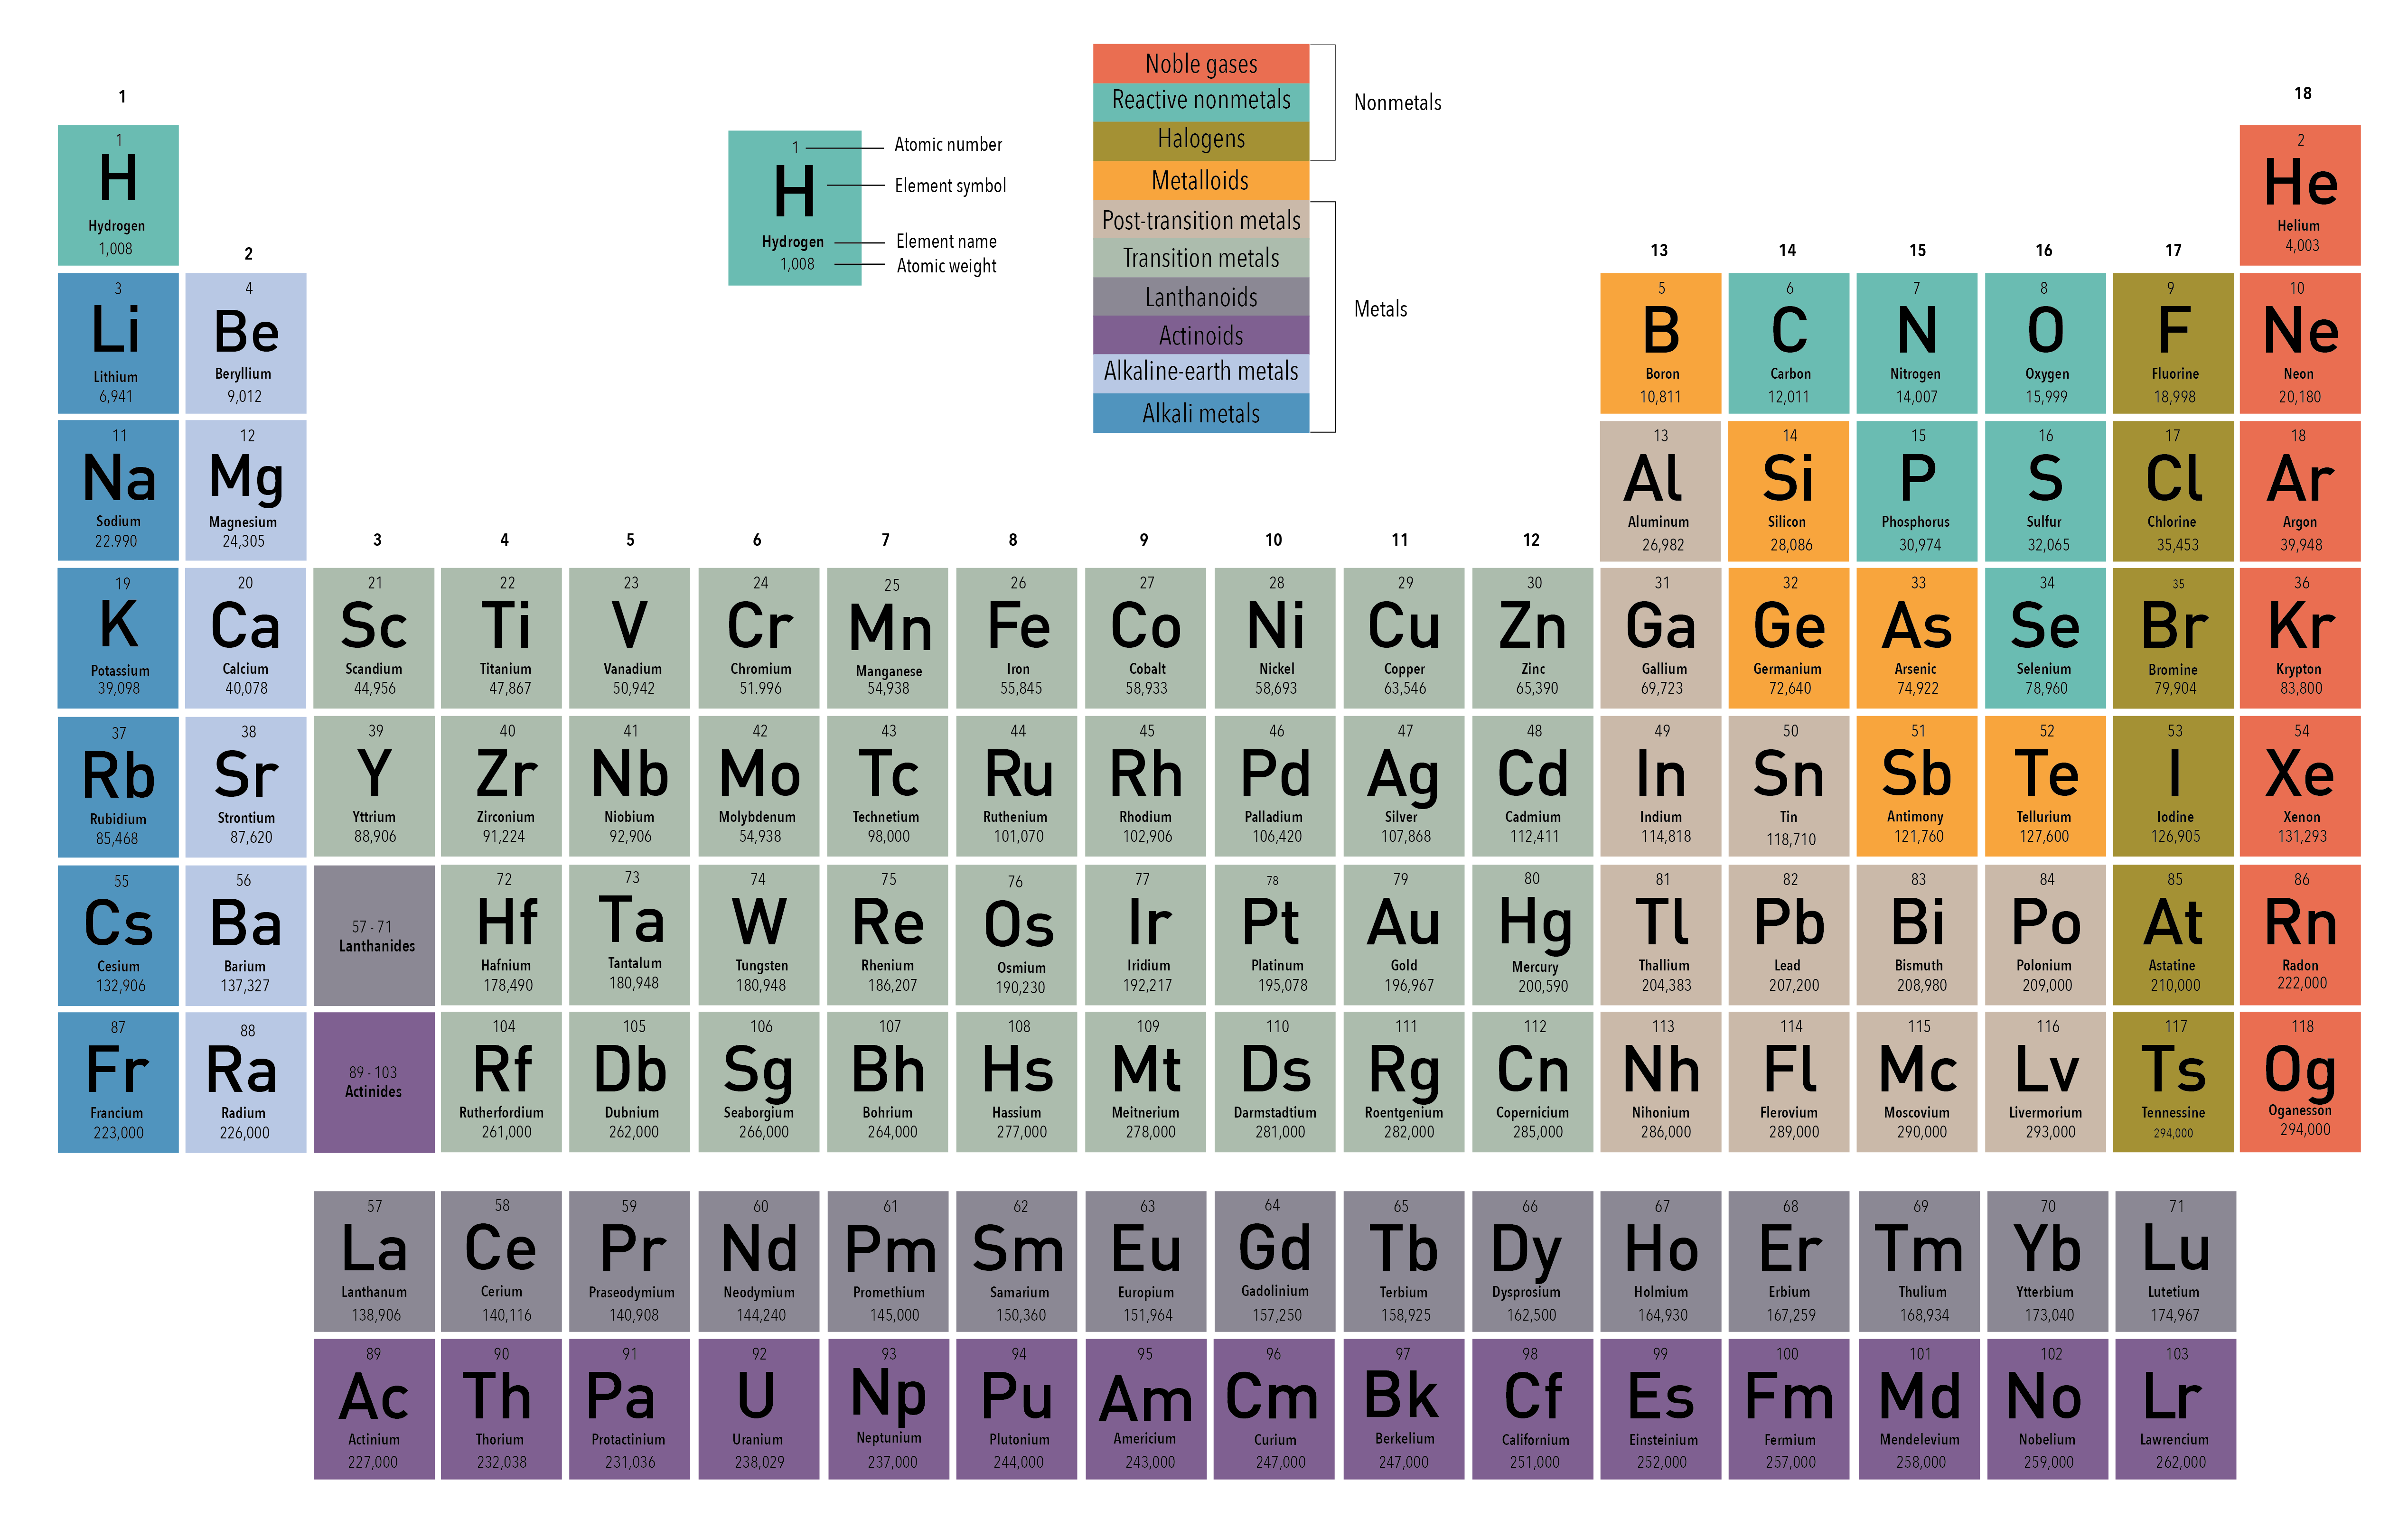 The Periodic Table of Elements 2021